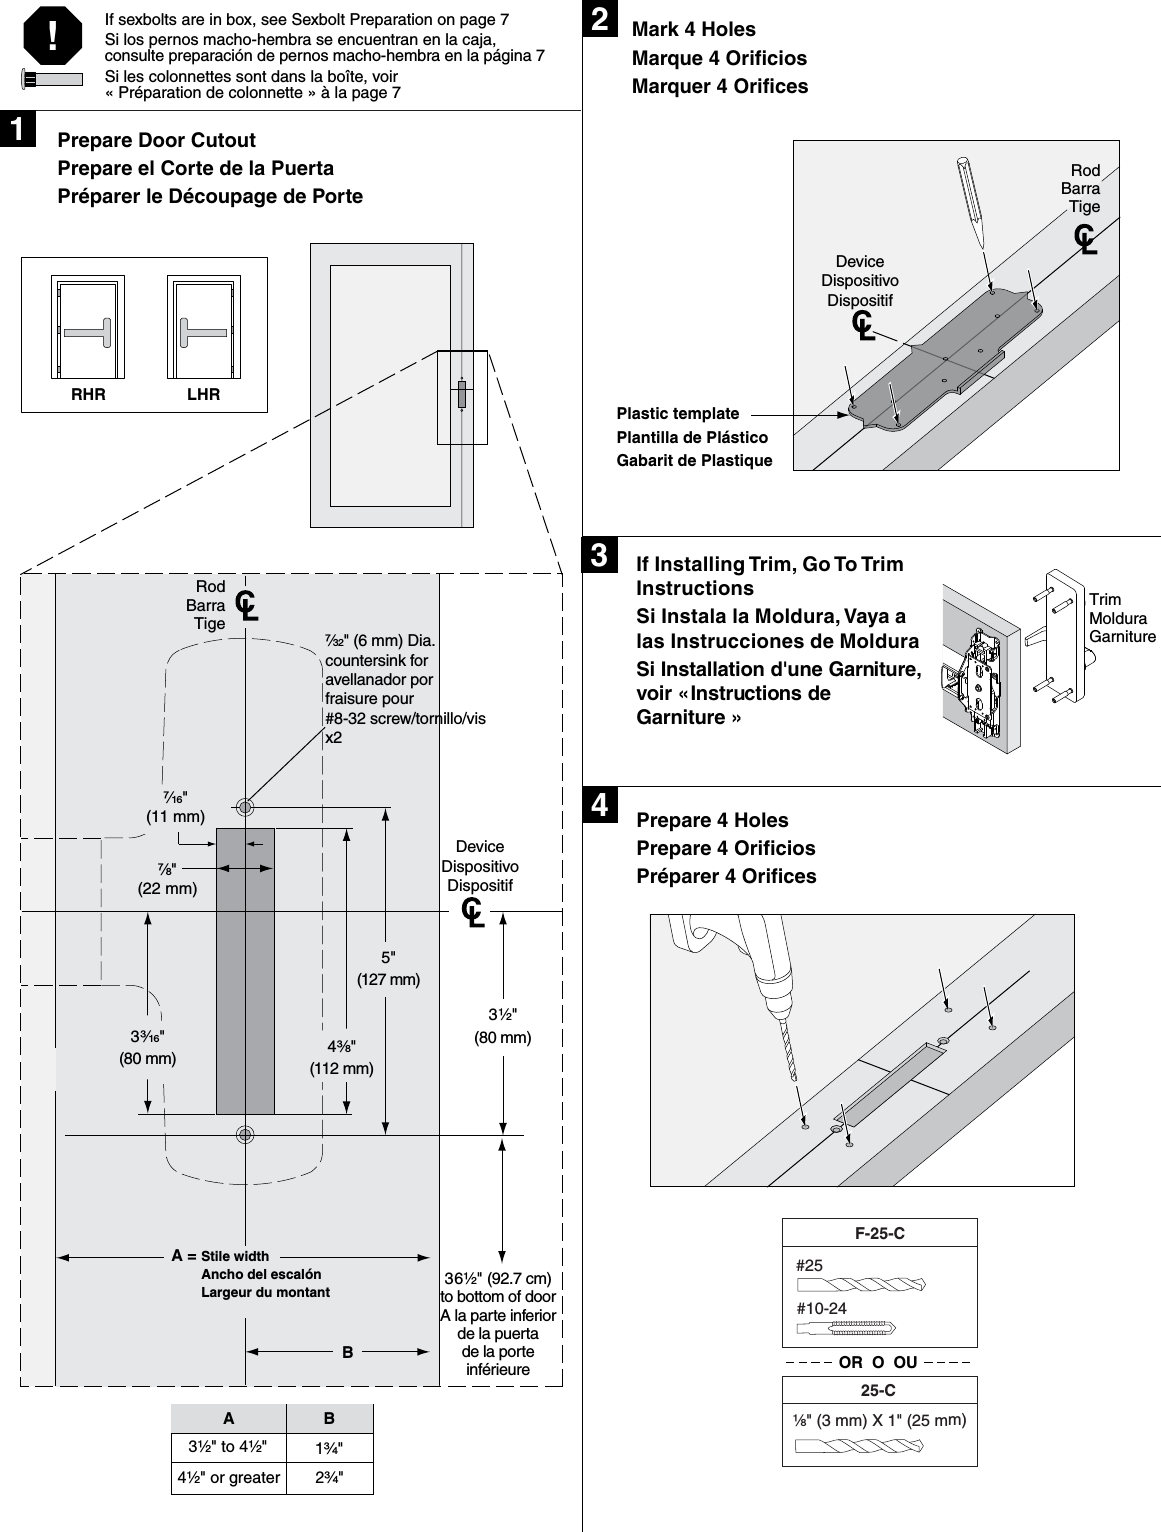 Page 2 of 8 - Falcon  25-C Installation Instructions 107415